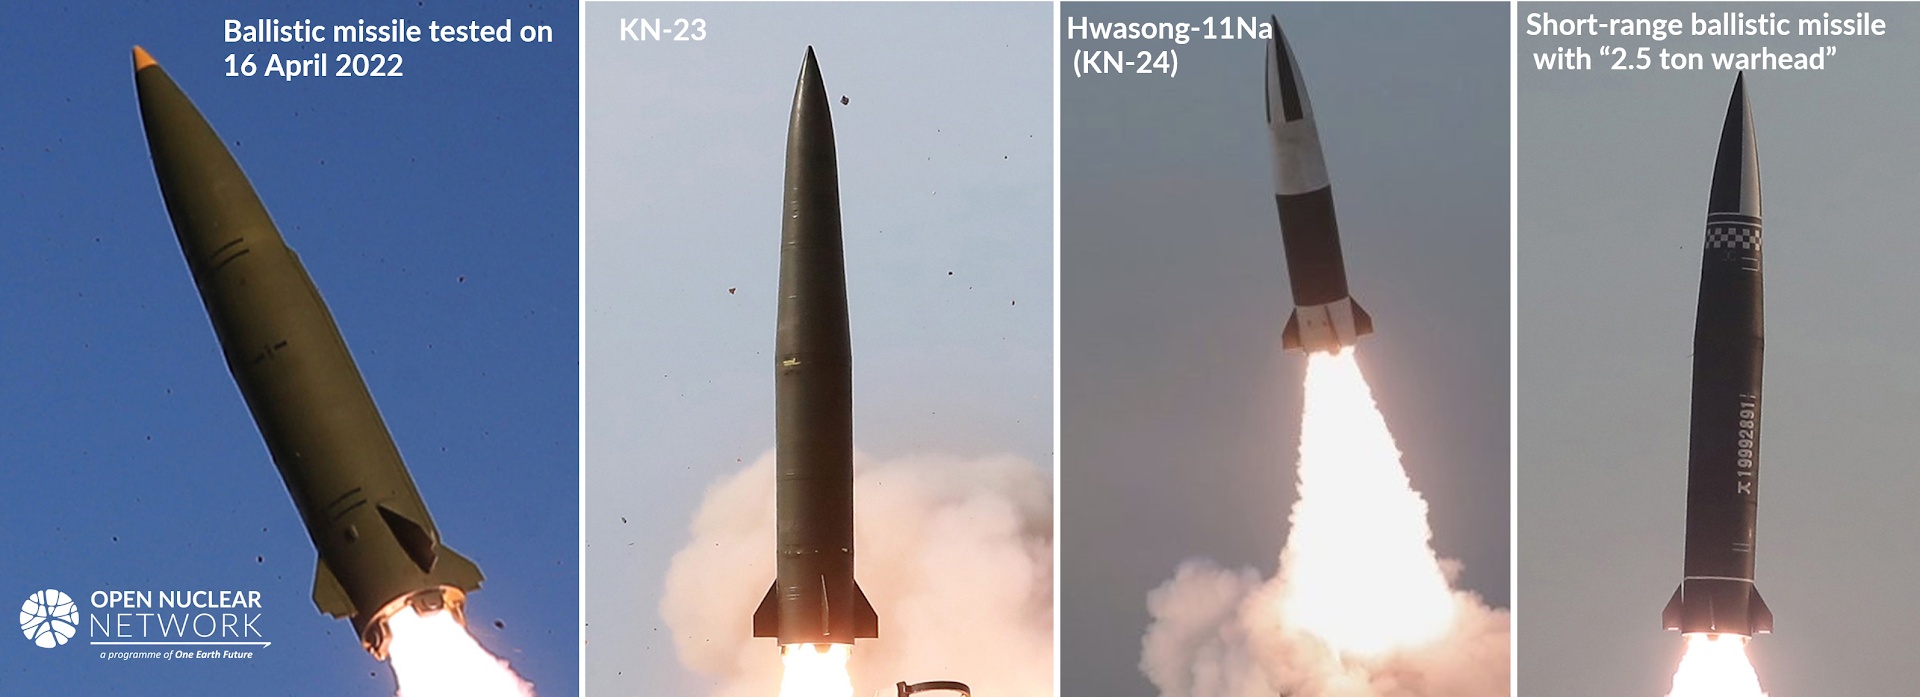 Short-range ballistic missiles developed by the DPRK in recent years